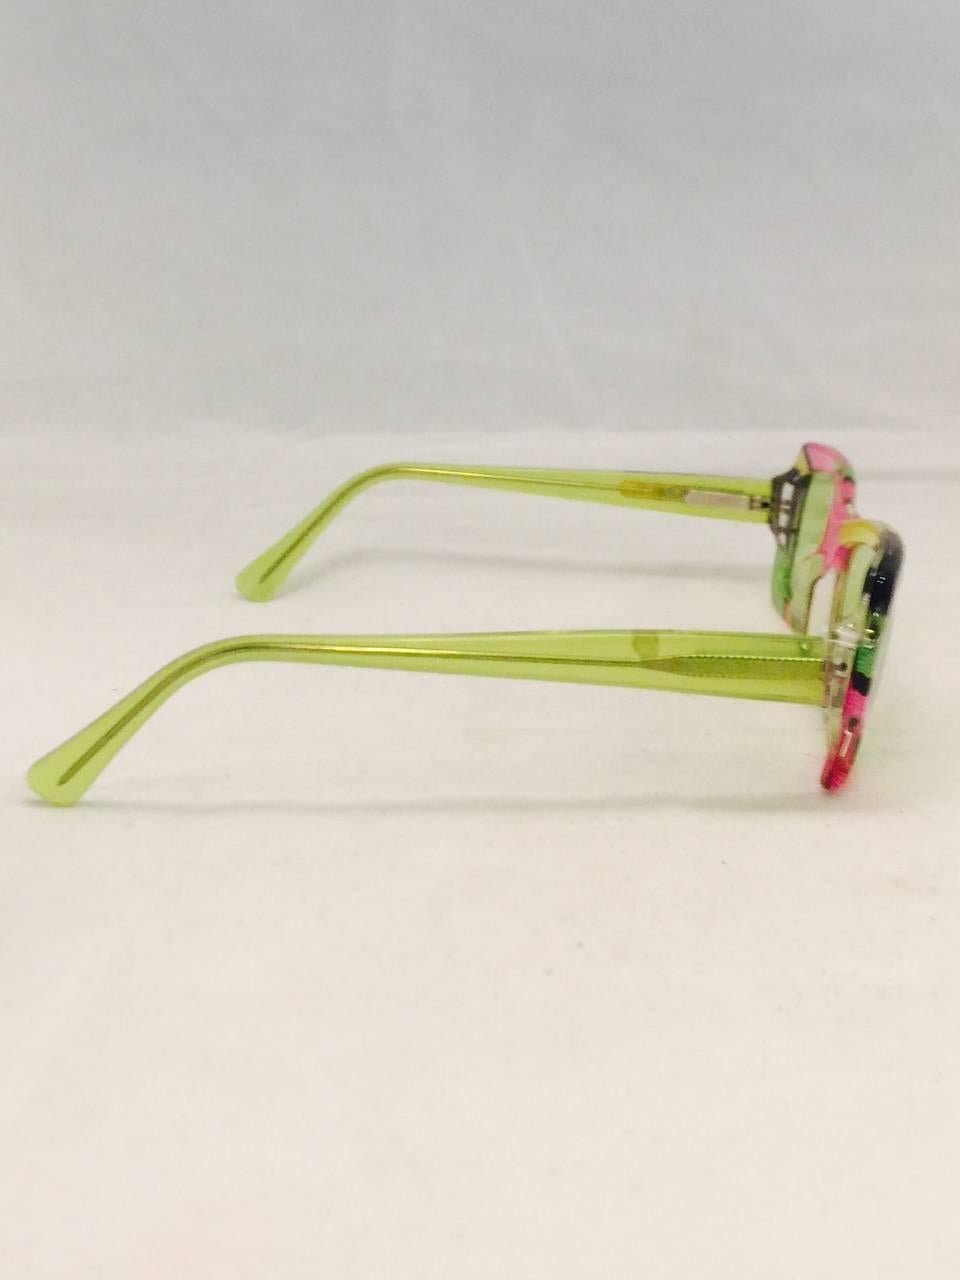 Beige Vintage1960s Emilio Pucci Sunglasses with Iconic Print in Green, Pink & Orange